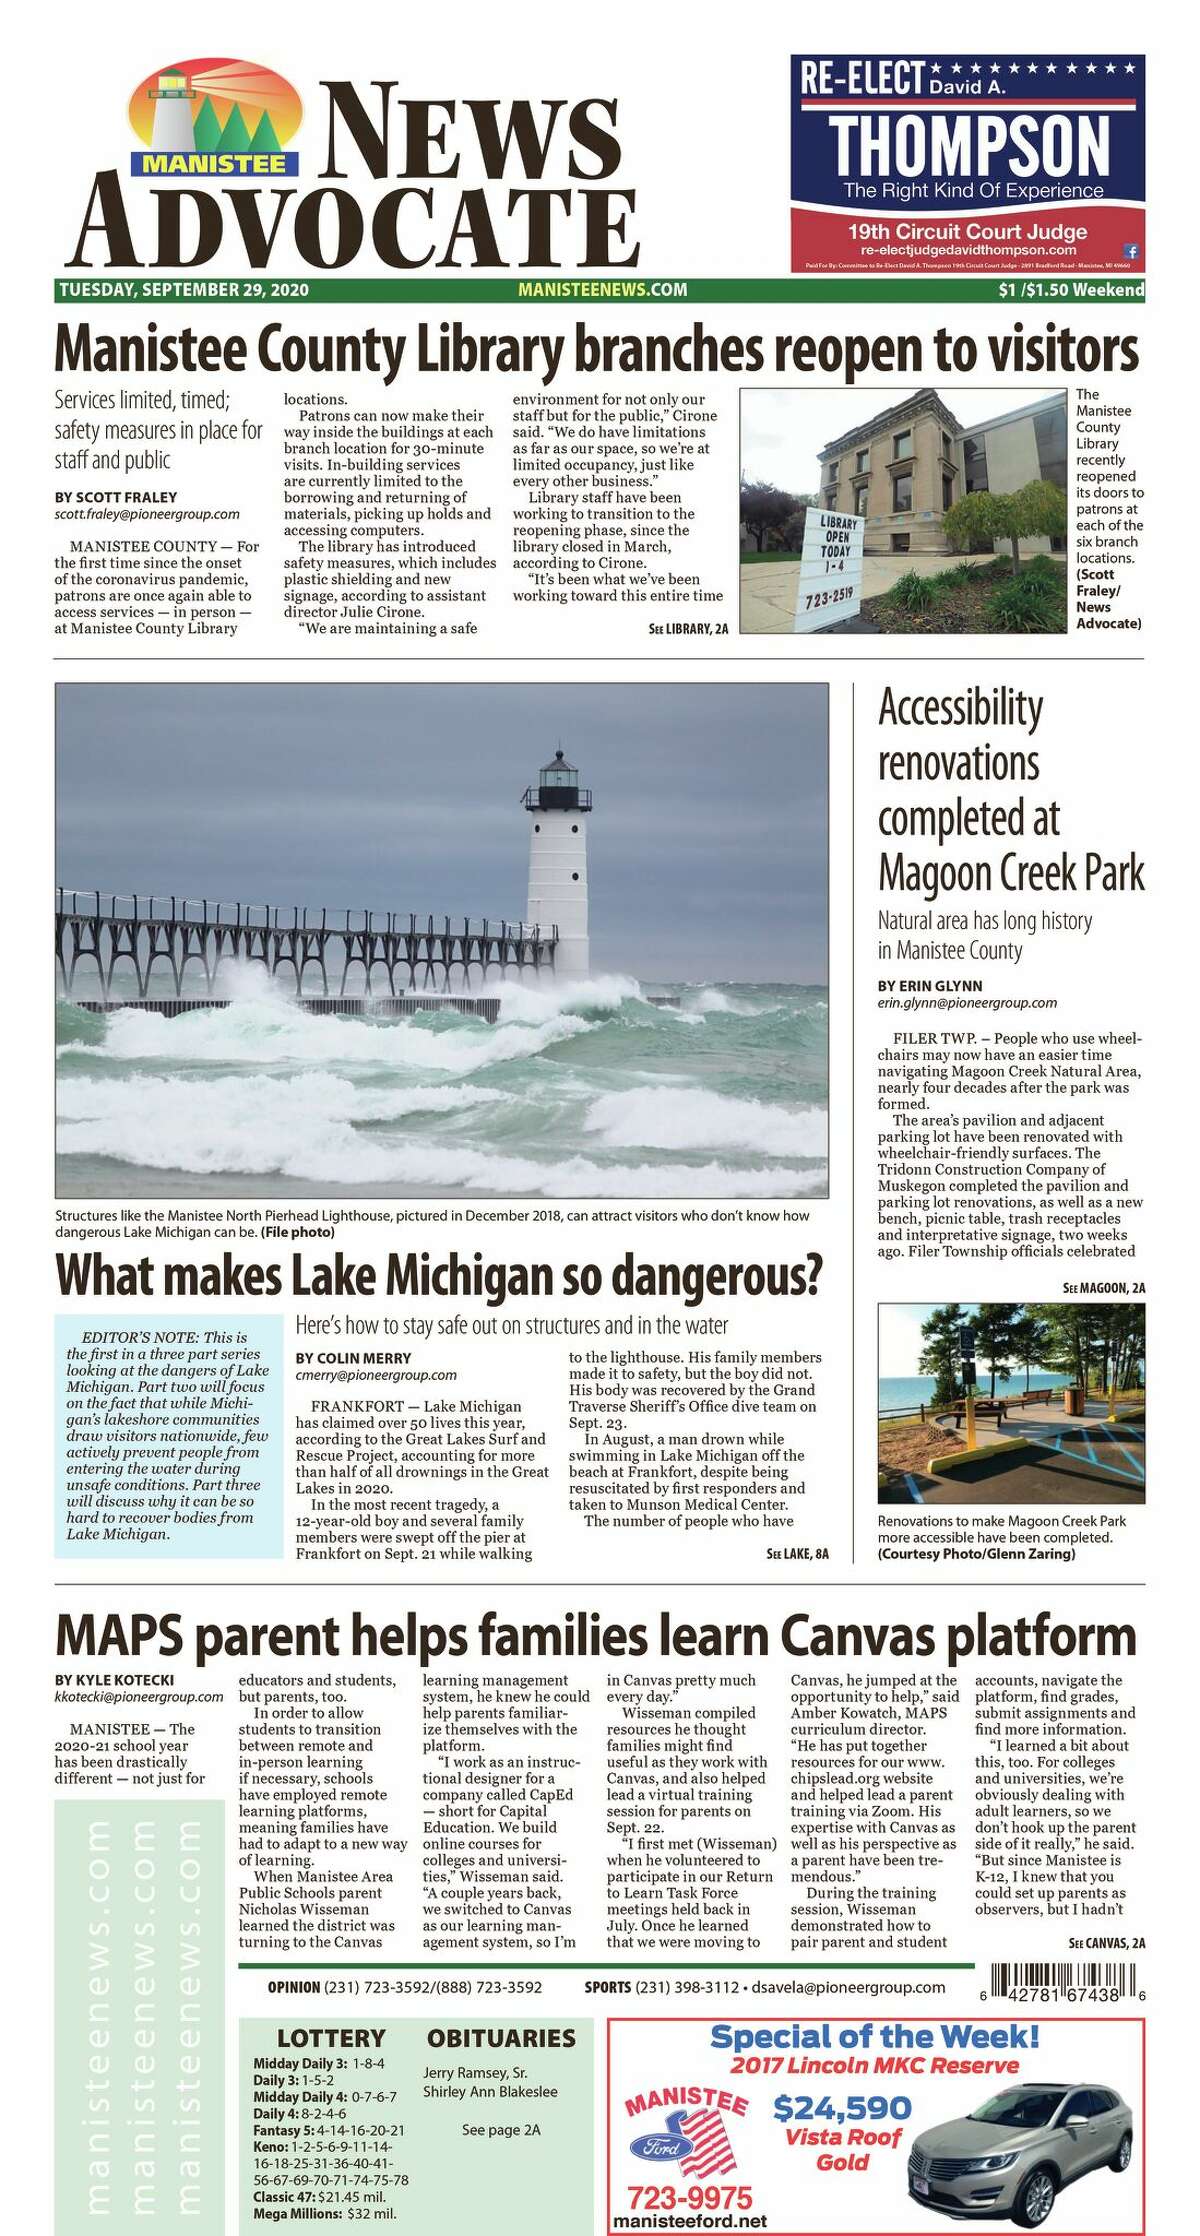 The Manistee News Advocate staff won first place for newspaper design in the Michigan Press Association Better Newspaper Contest for the Sept. 29, 2020 edition.